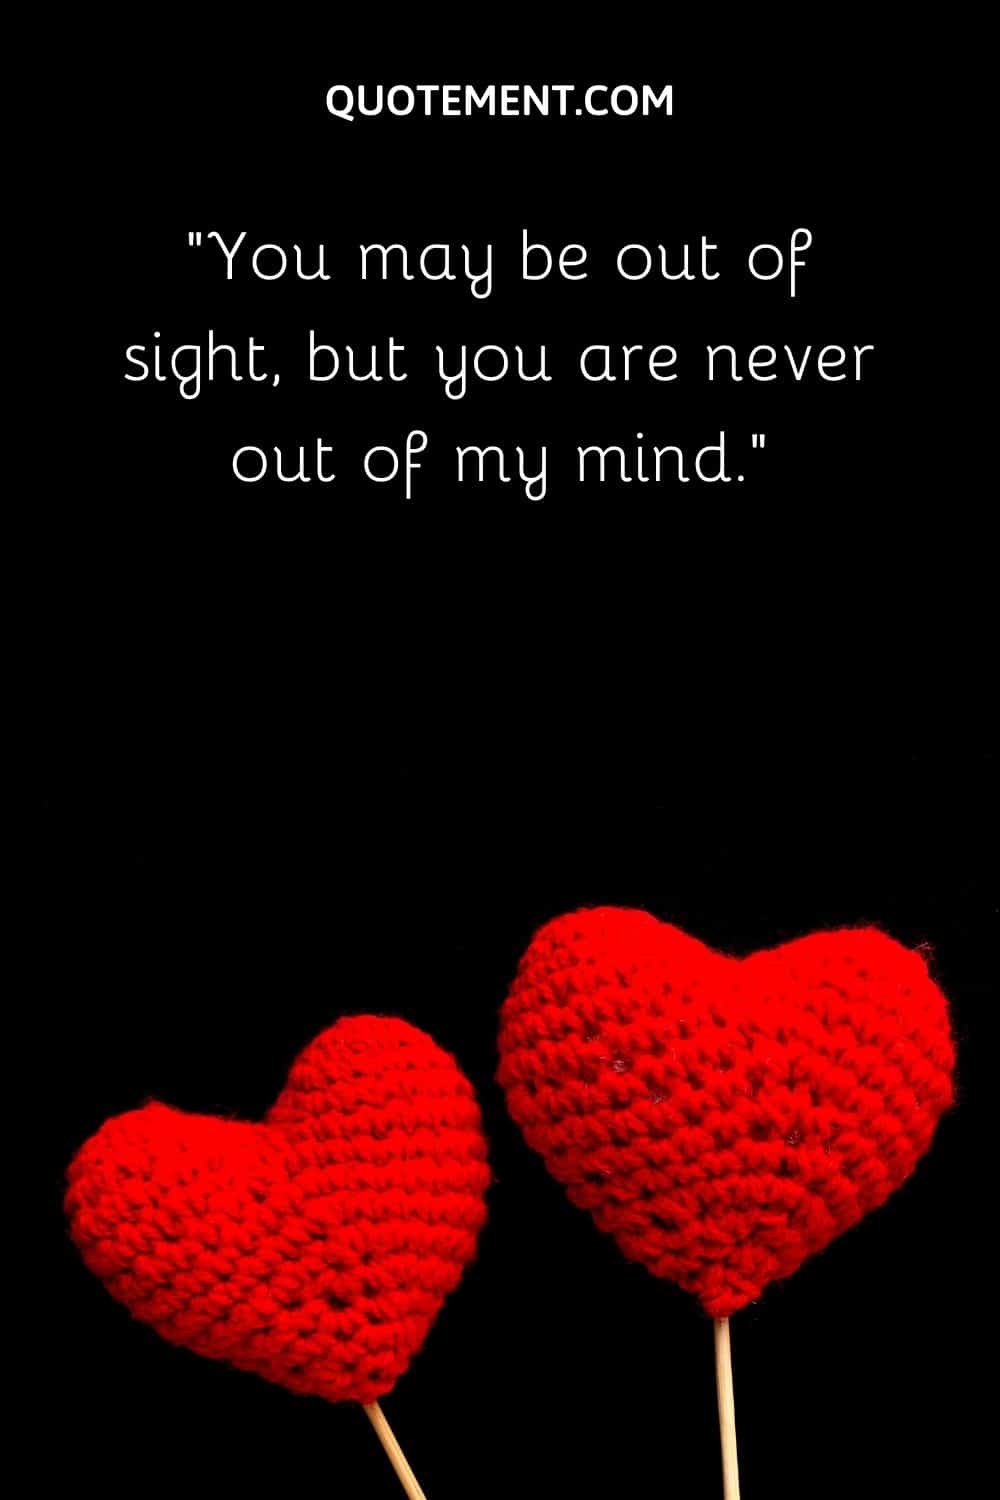 You may be out of sight, but you are never out of my mind.